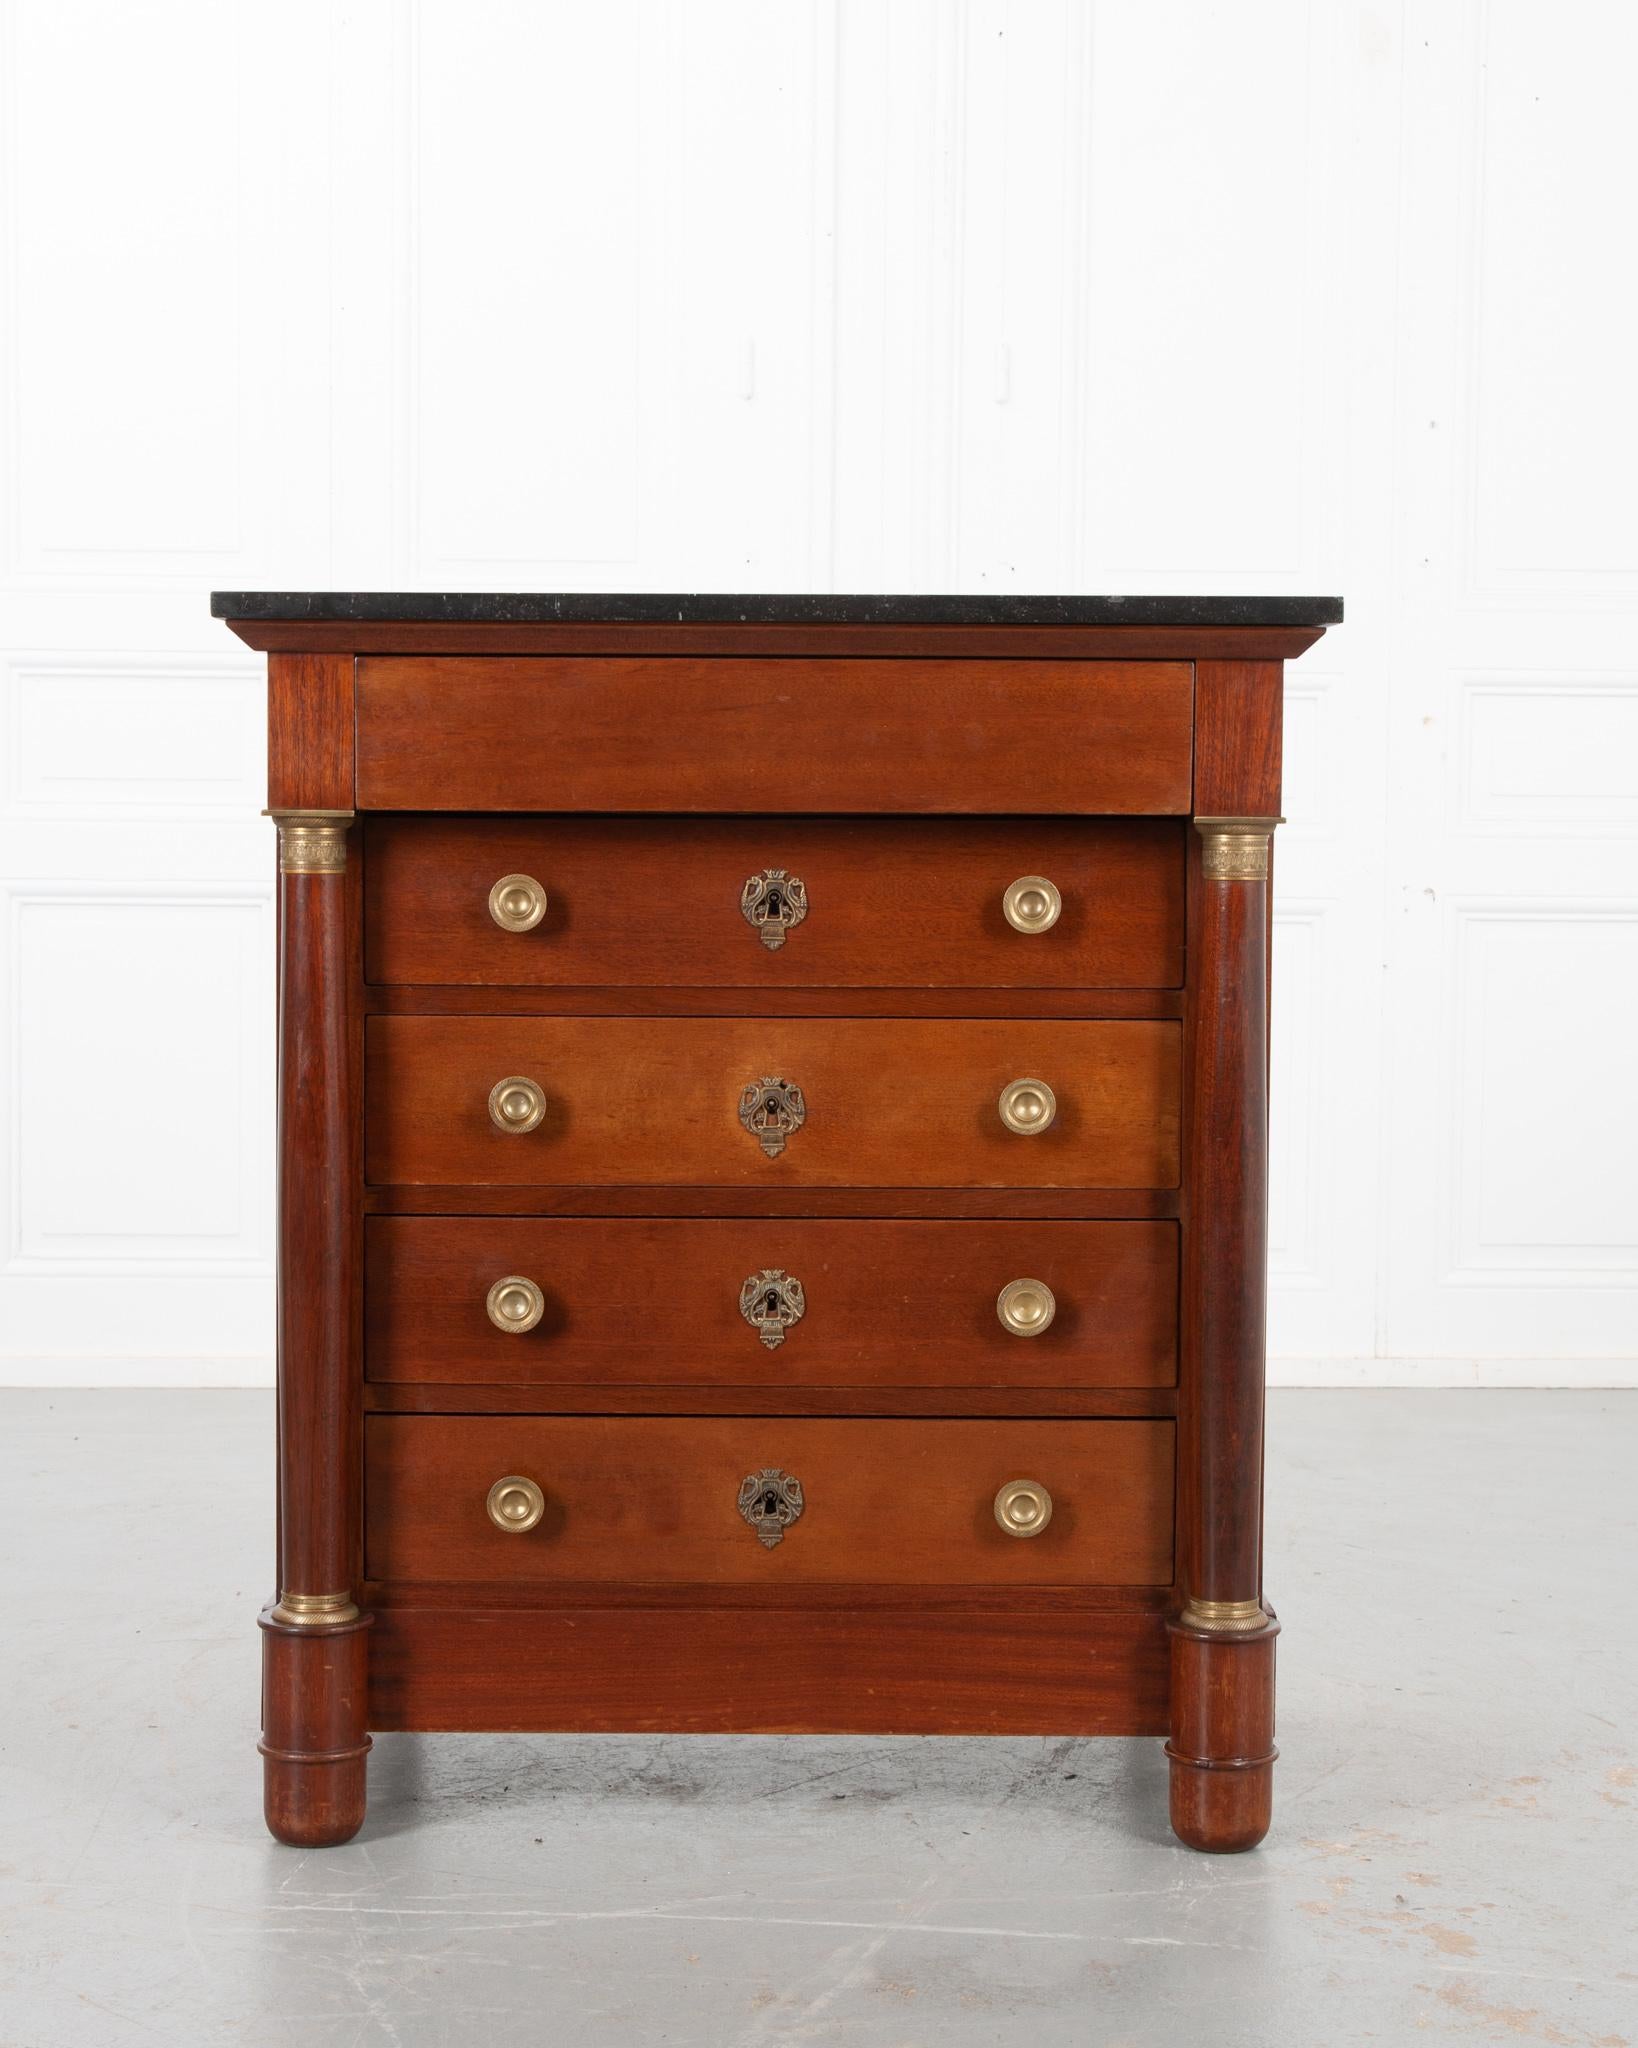 A dignified petite Empire commode from 19th century France. Unique black fossil Belgian Granite tops the mahogany base. A hidden drawer without hardware, sits flush at the top of the commode. Flanking the bank of drawers are column forms with